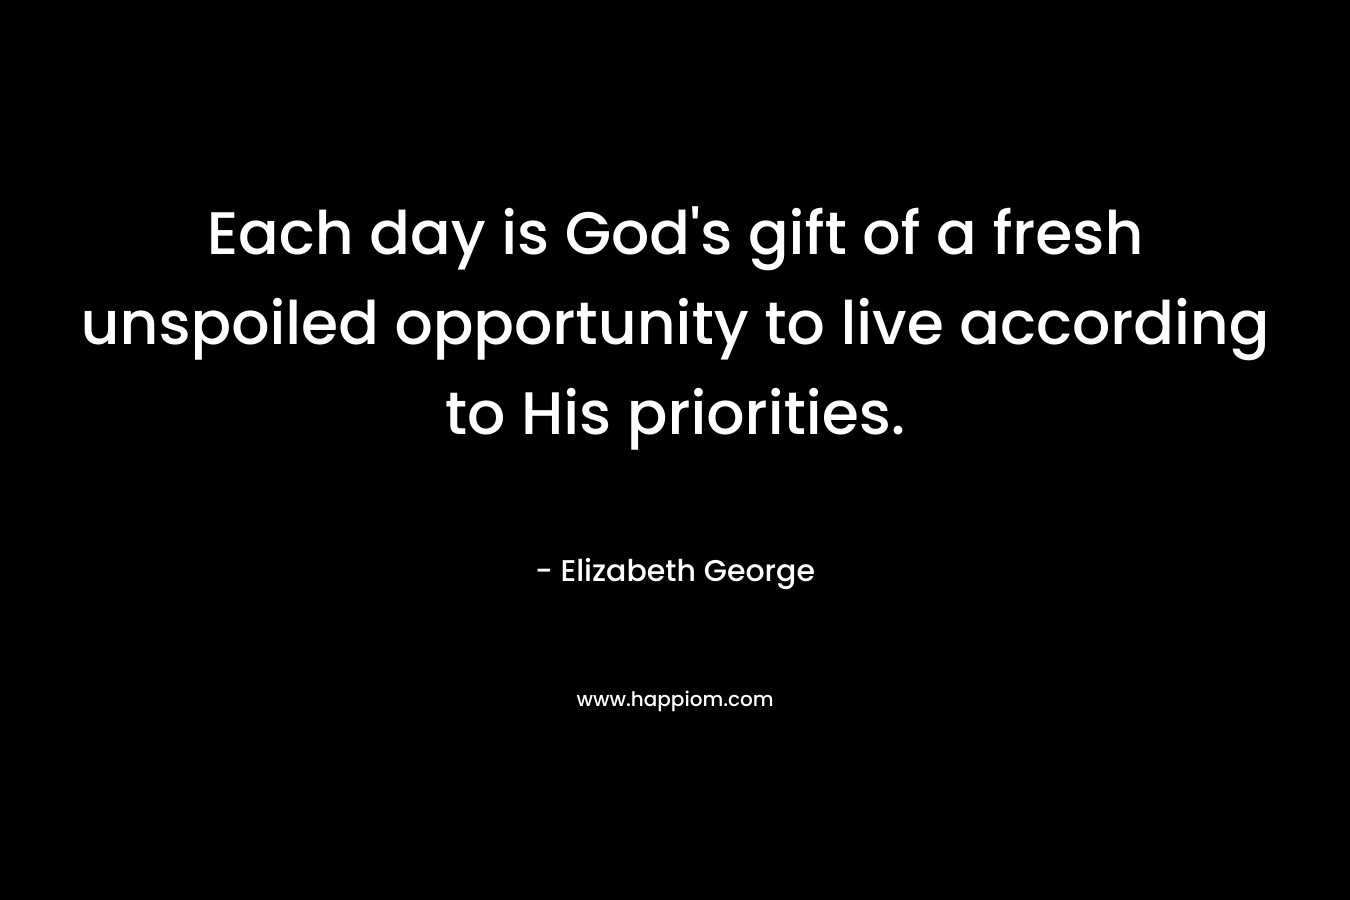 Each day is God's gift of a fresh unspoiled opportunity to live according to His priorities.